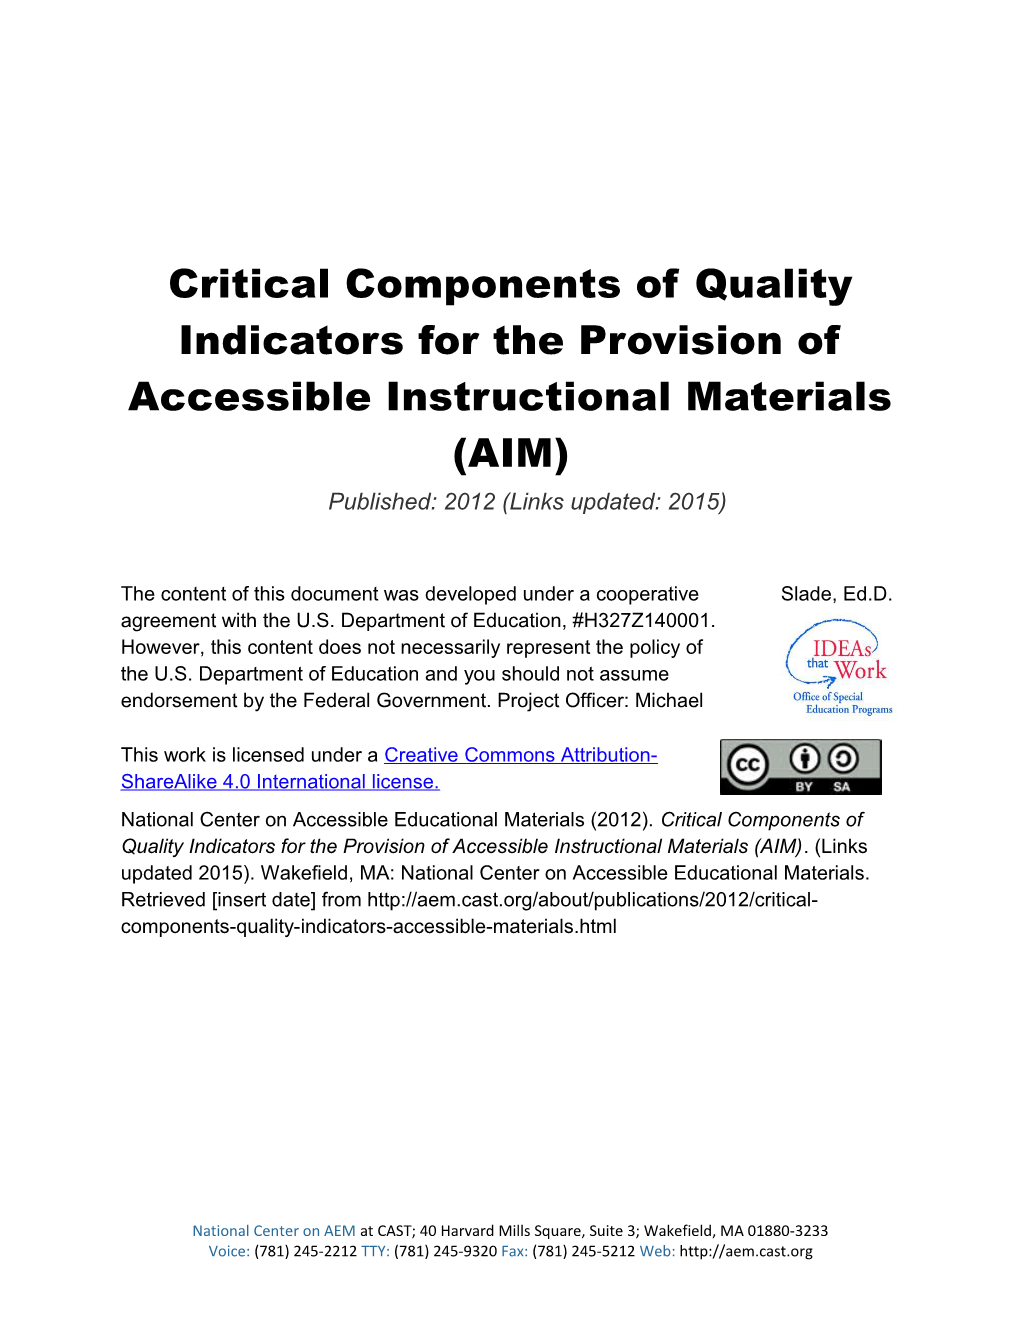 Critical Components of Quality Indicators for the Provision of Accessible Instructional